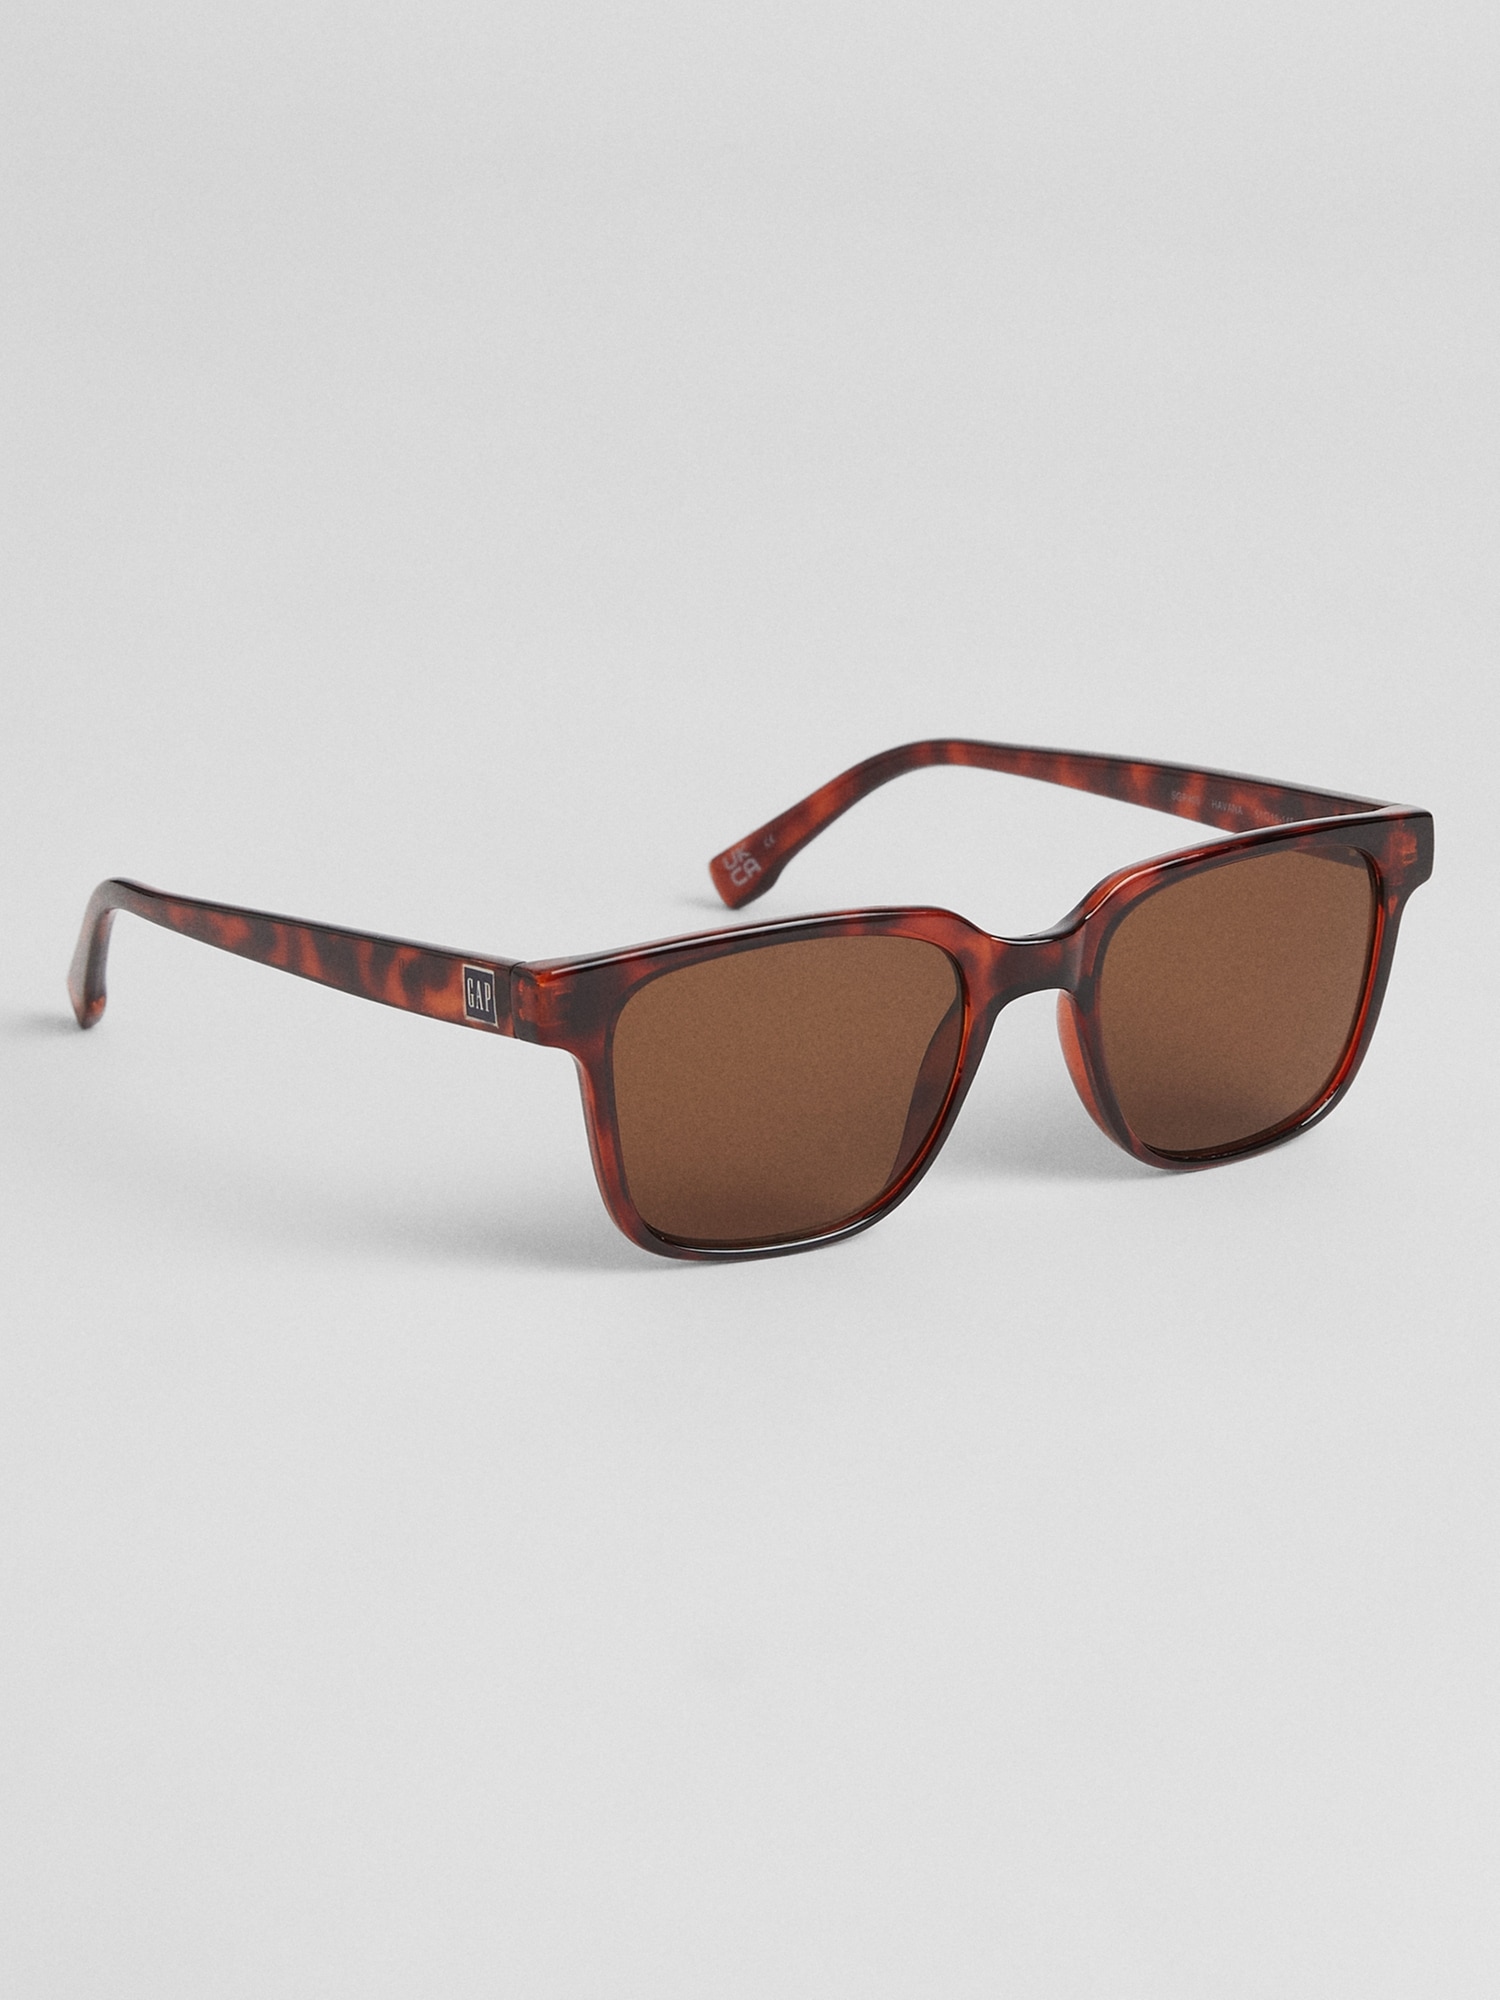 Gap Factory Square Frame Sunglasses (Tort Gold Brown)